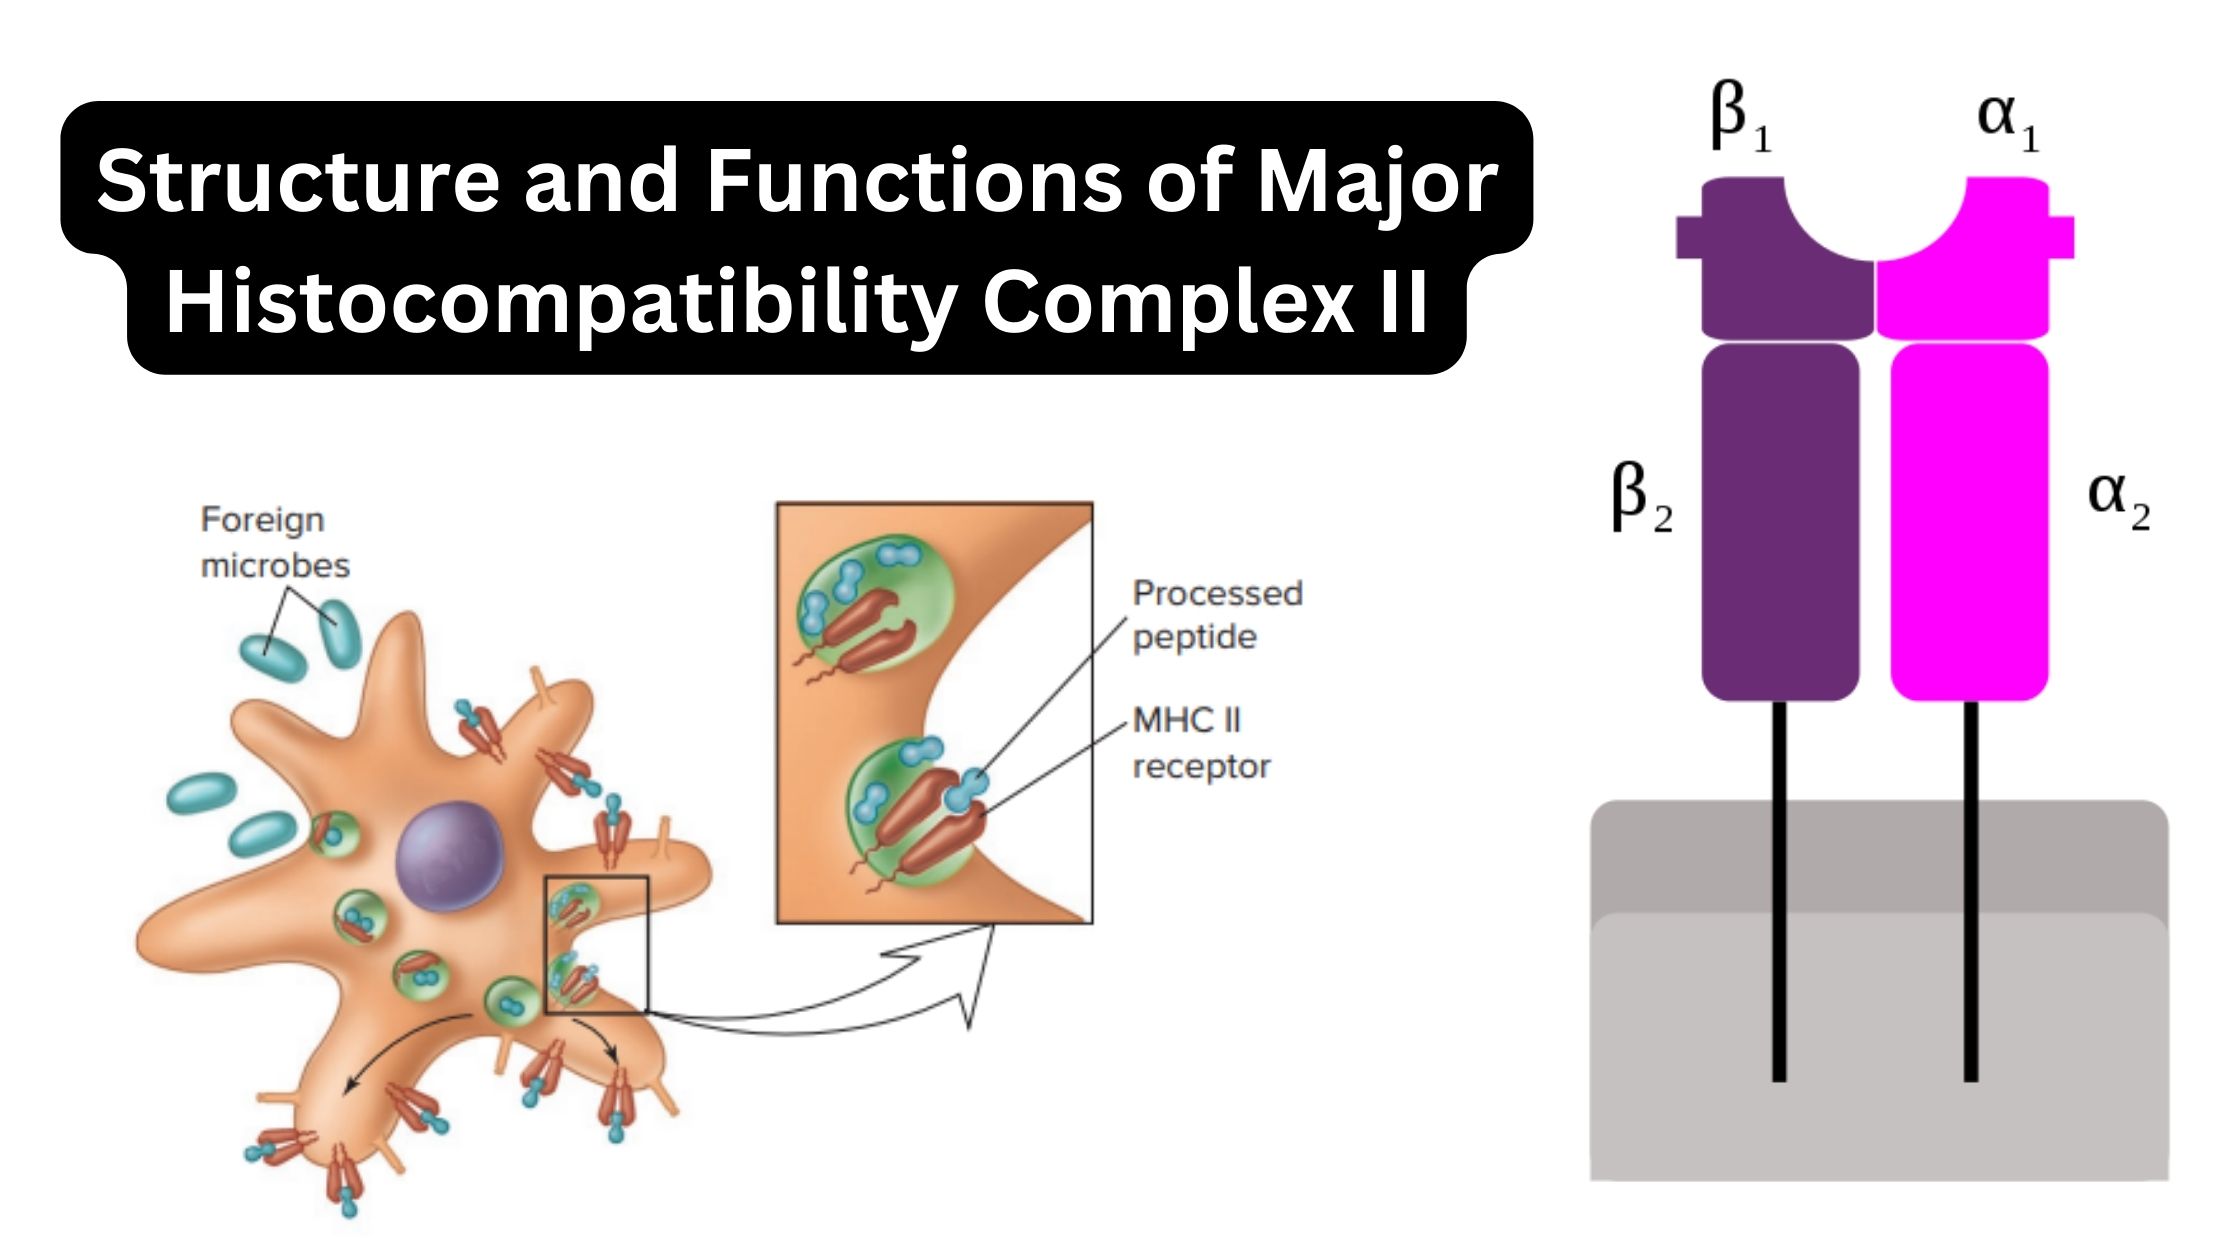 Structure and Functions of Major Histocompatibility Complex II